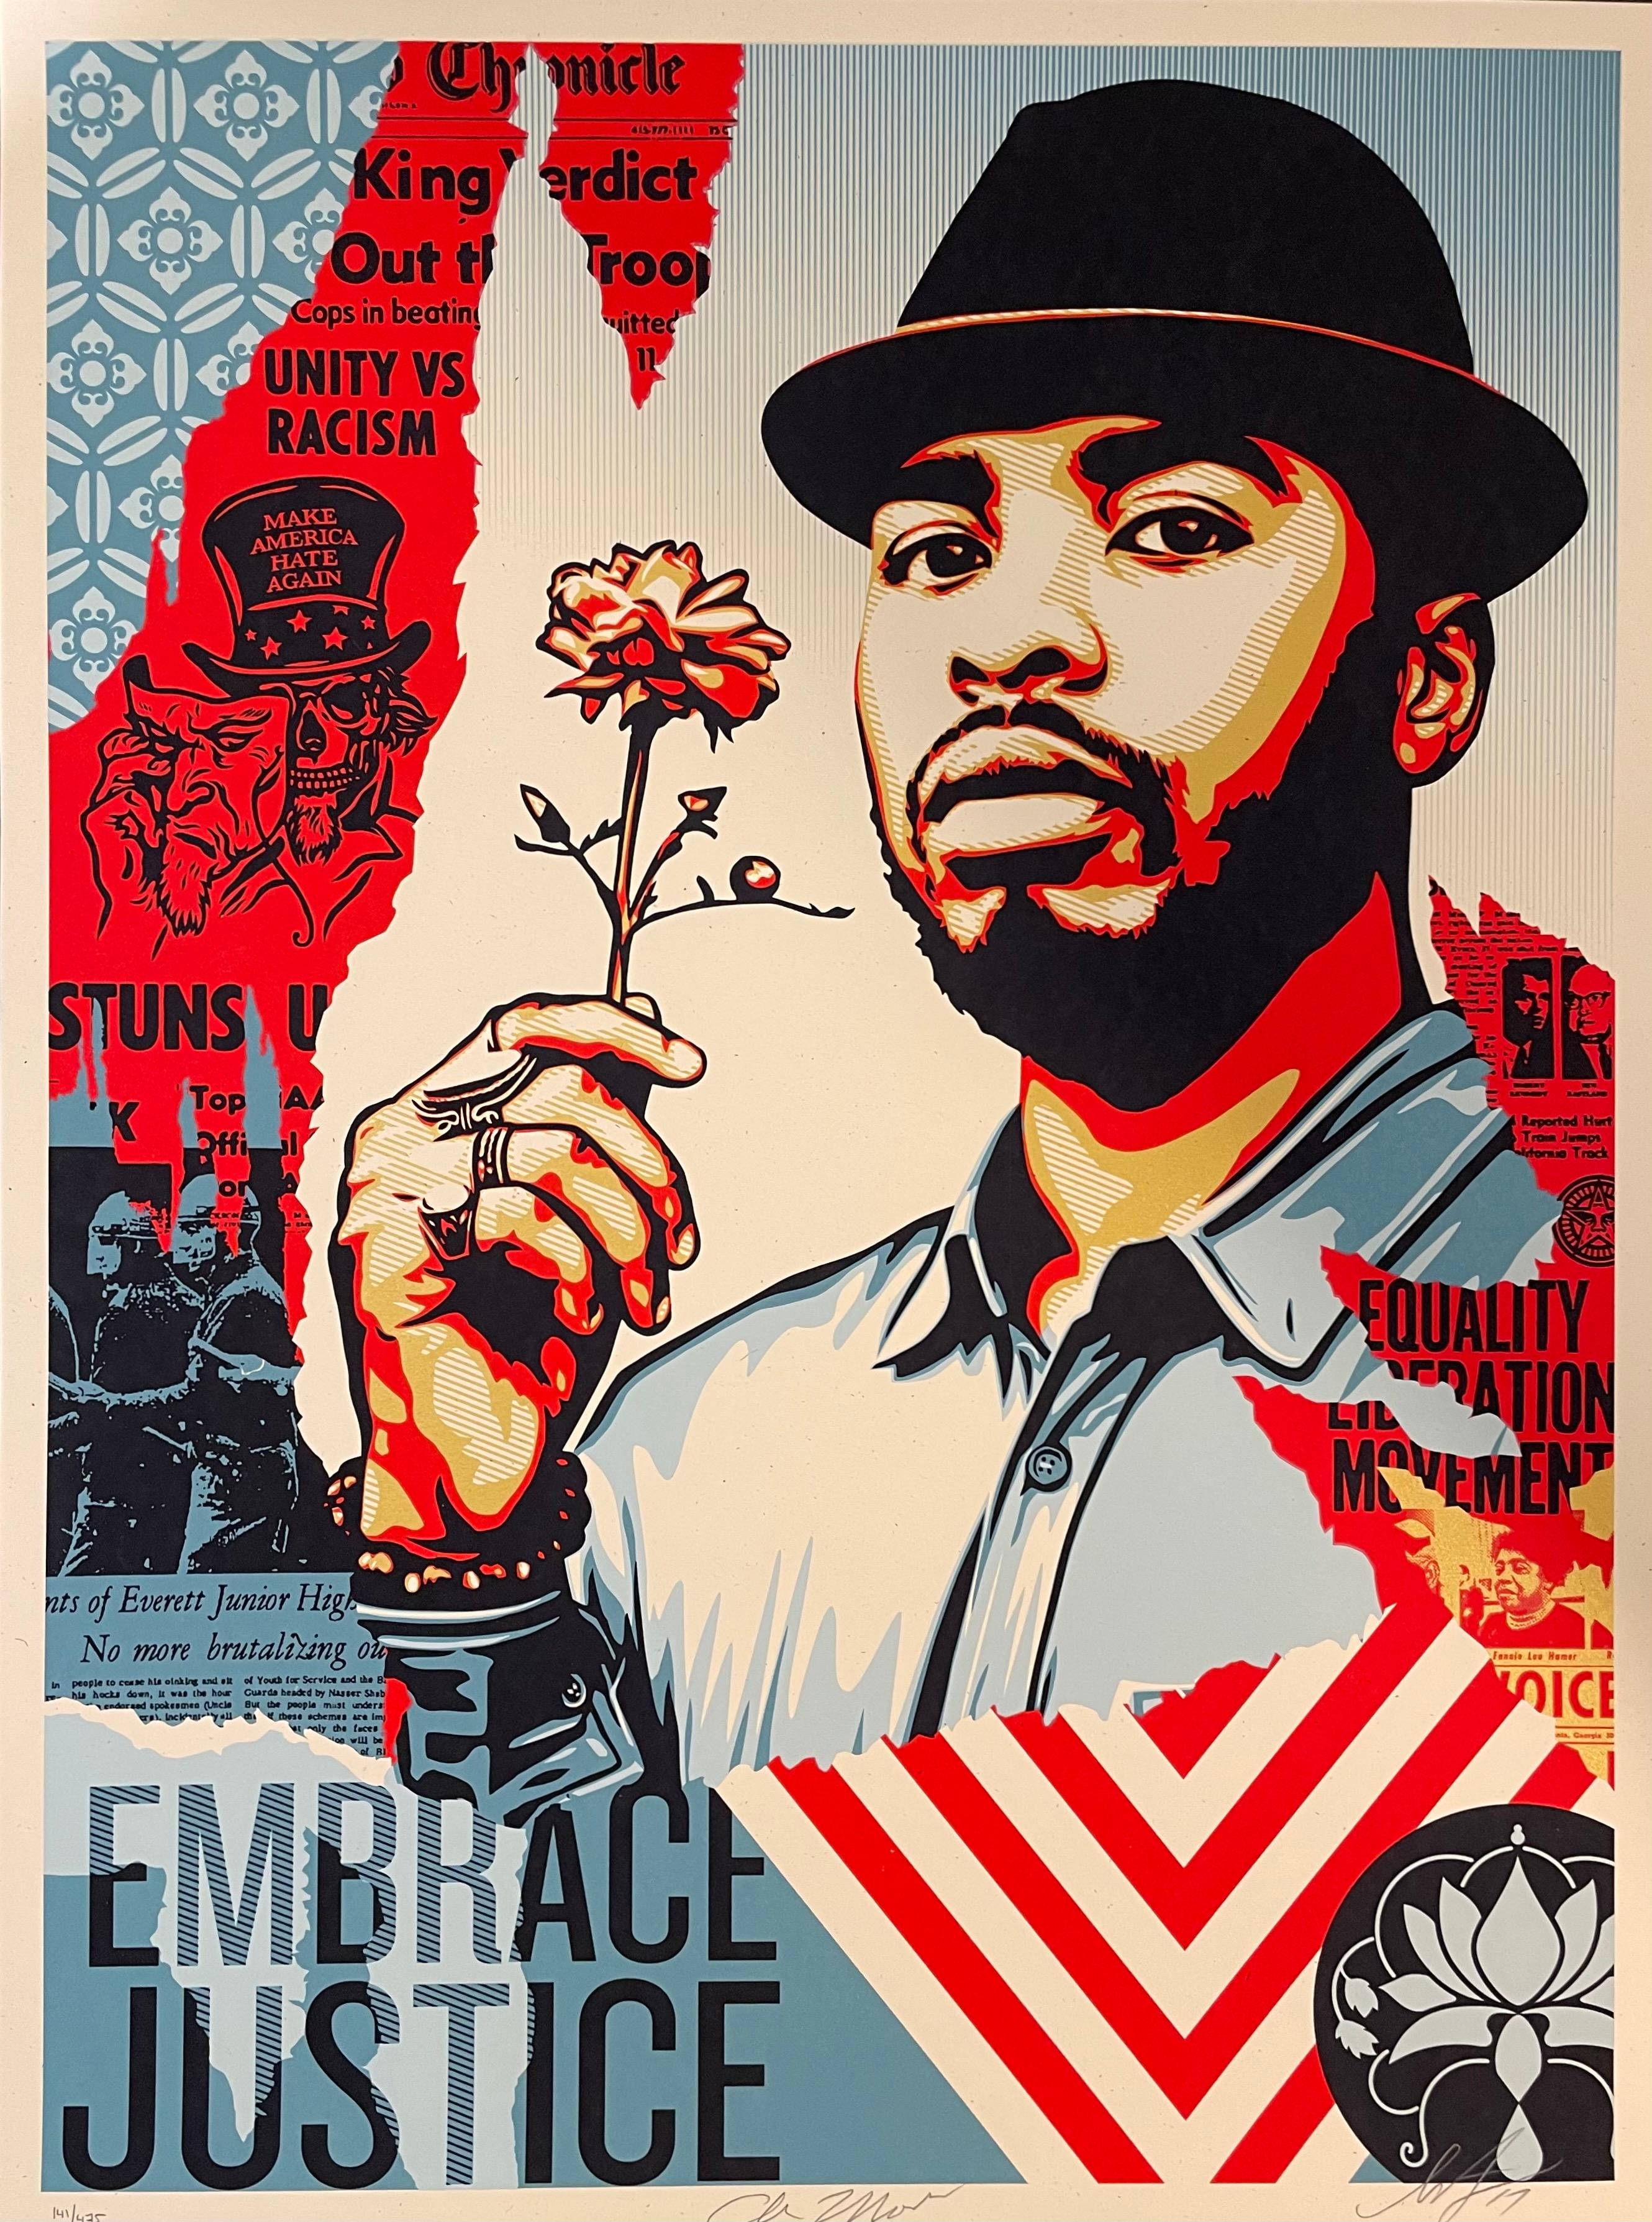 What style of art is Shepard Fairey known for?